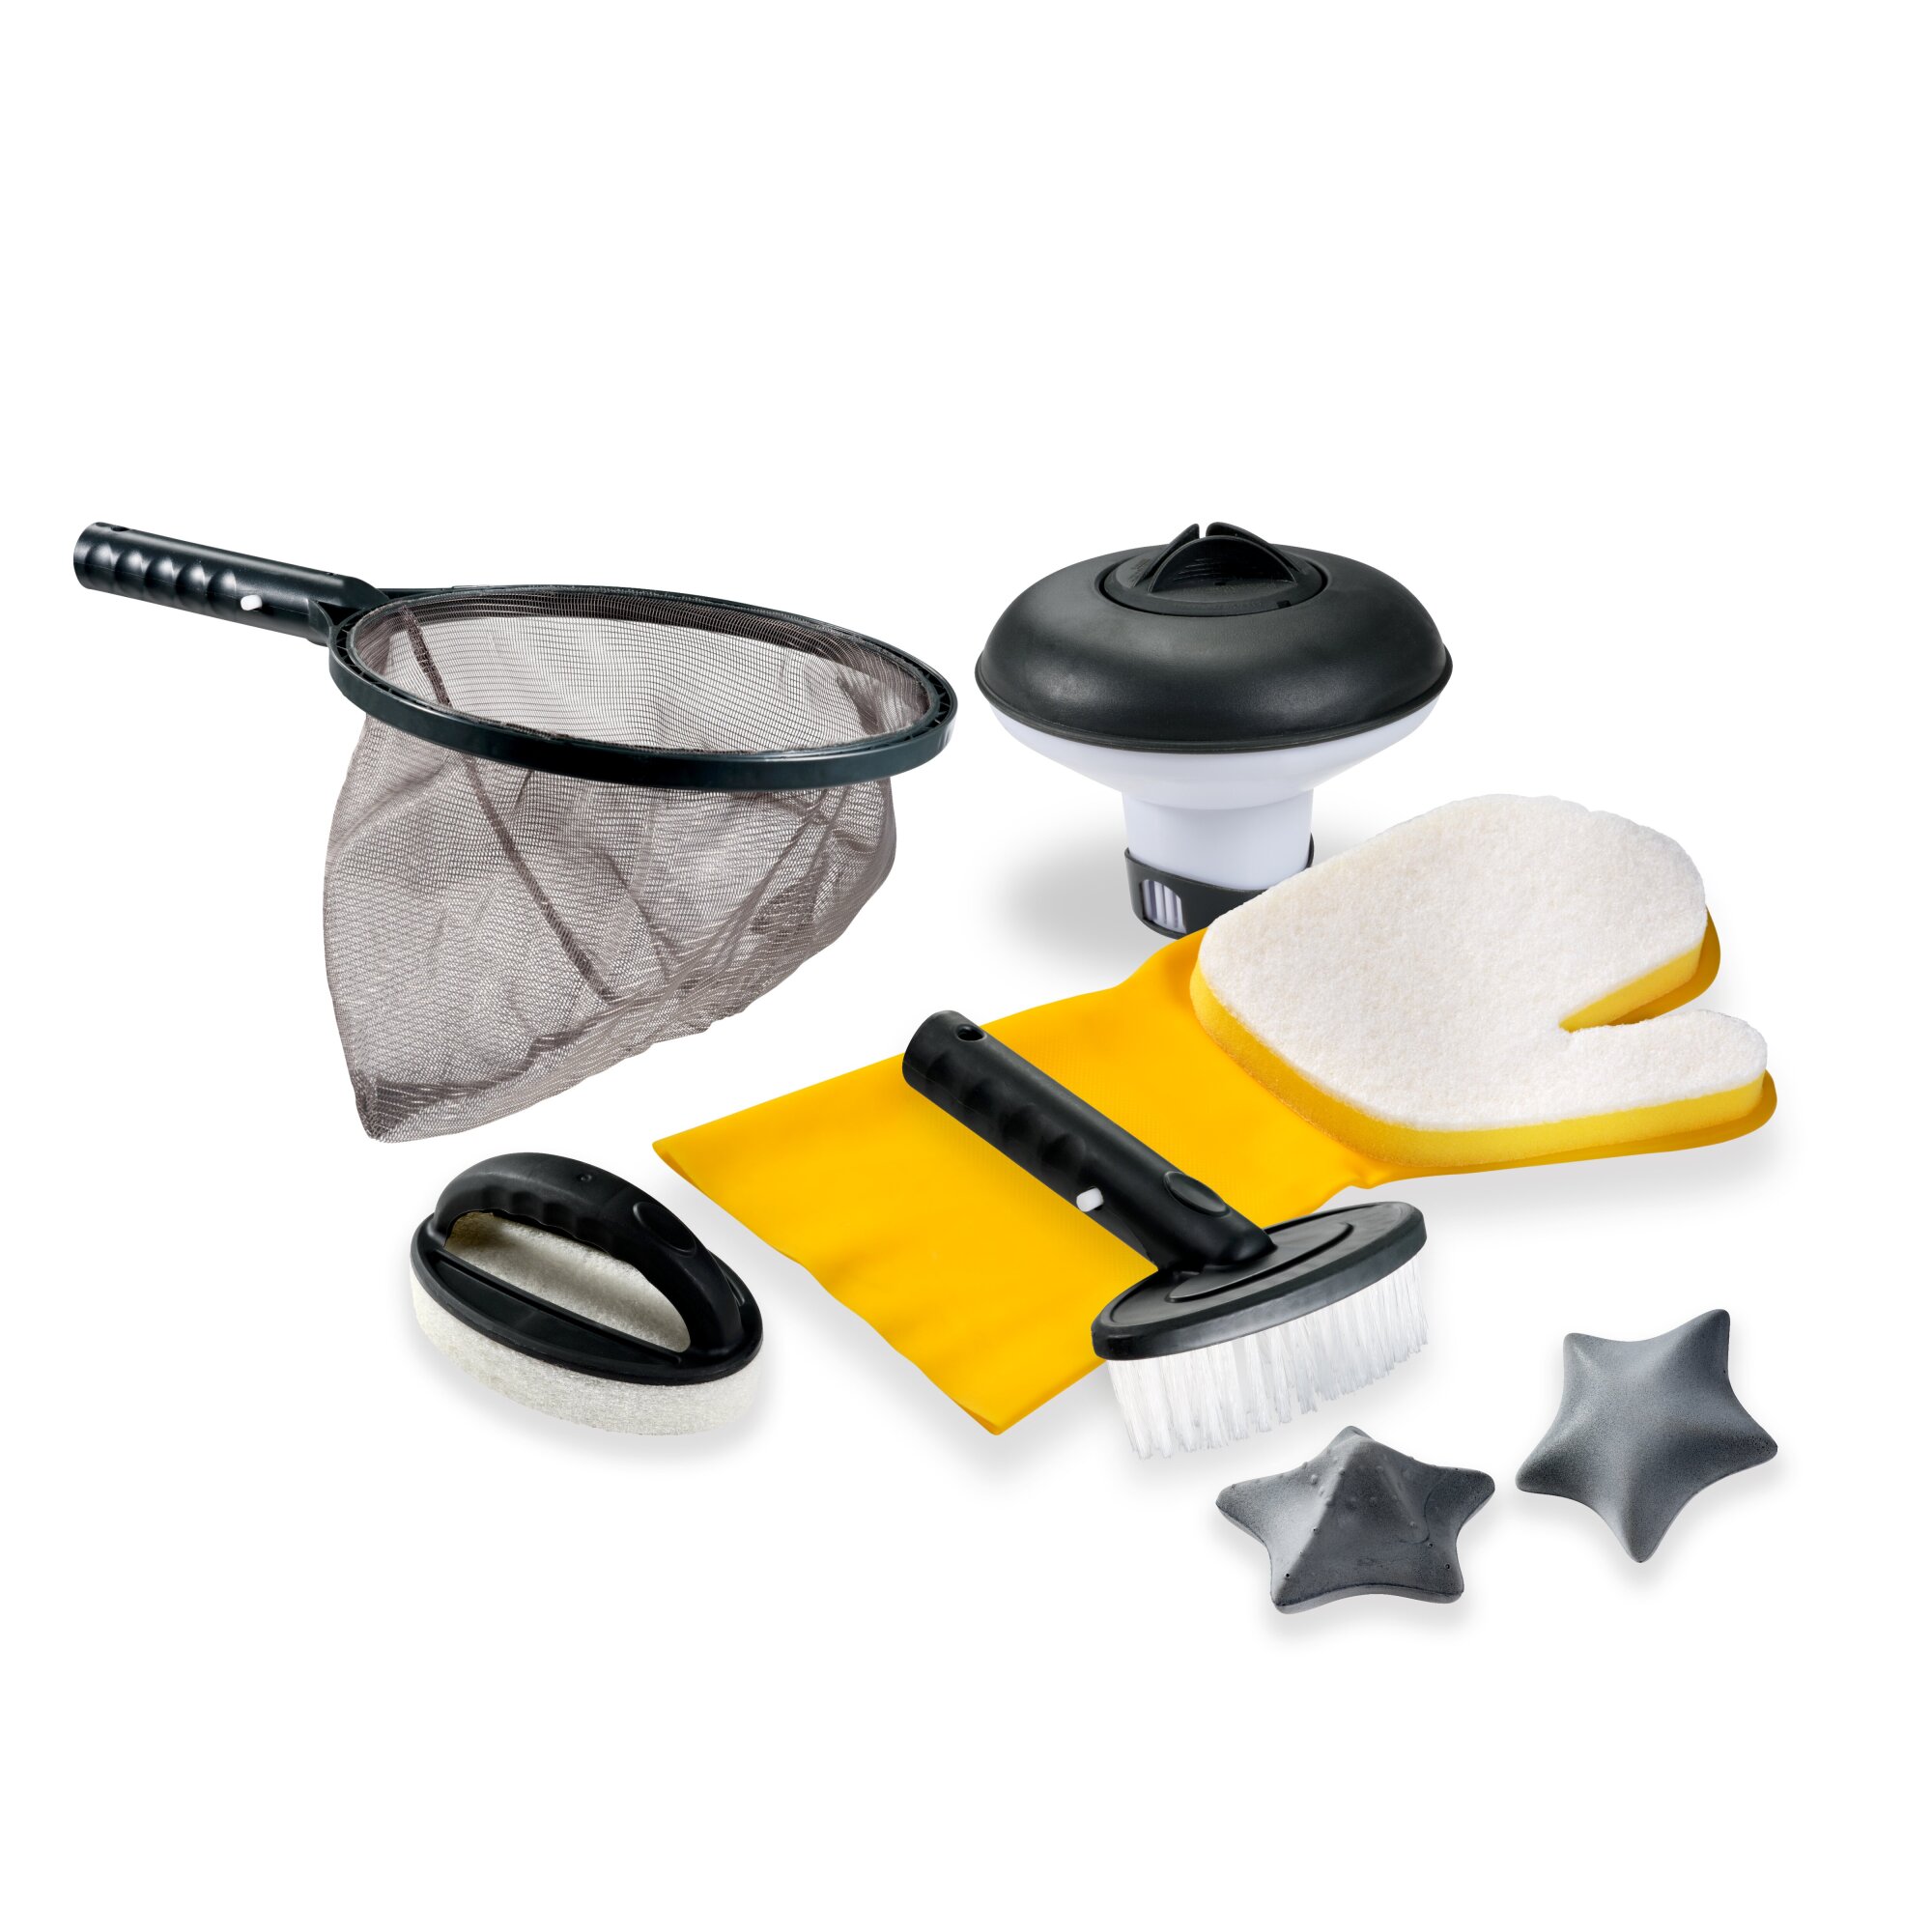 Spa cleaning set